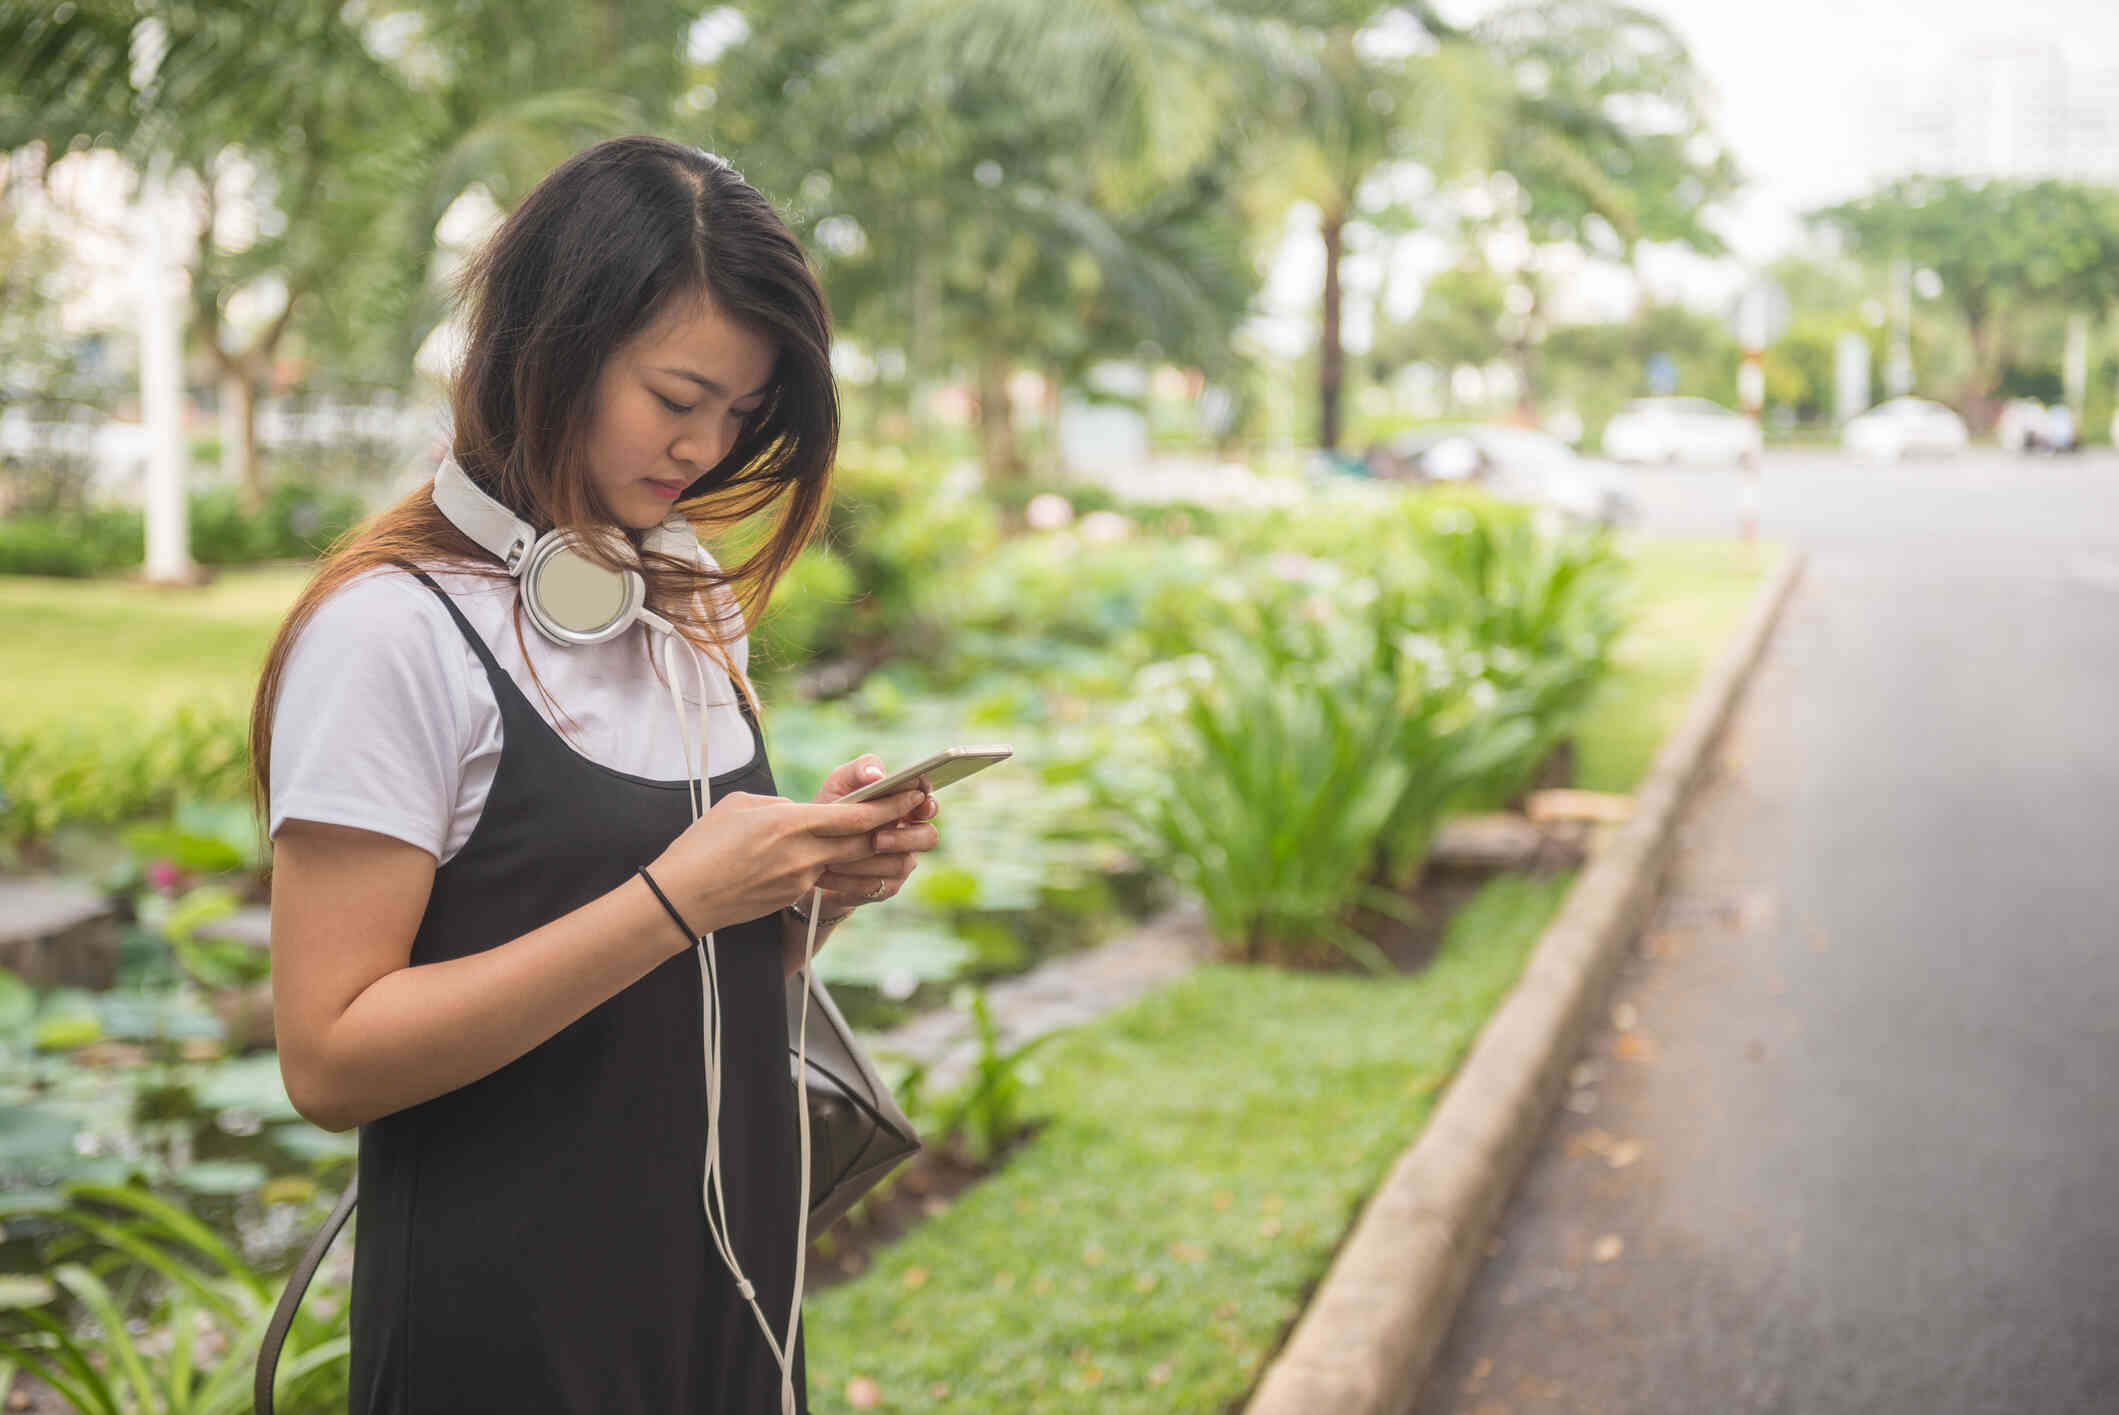 A teen girl with white headphones stands outside on a sunny day and looks down at the cellphone in her hand with a blank expressions.